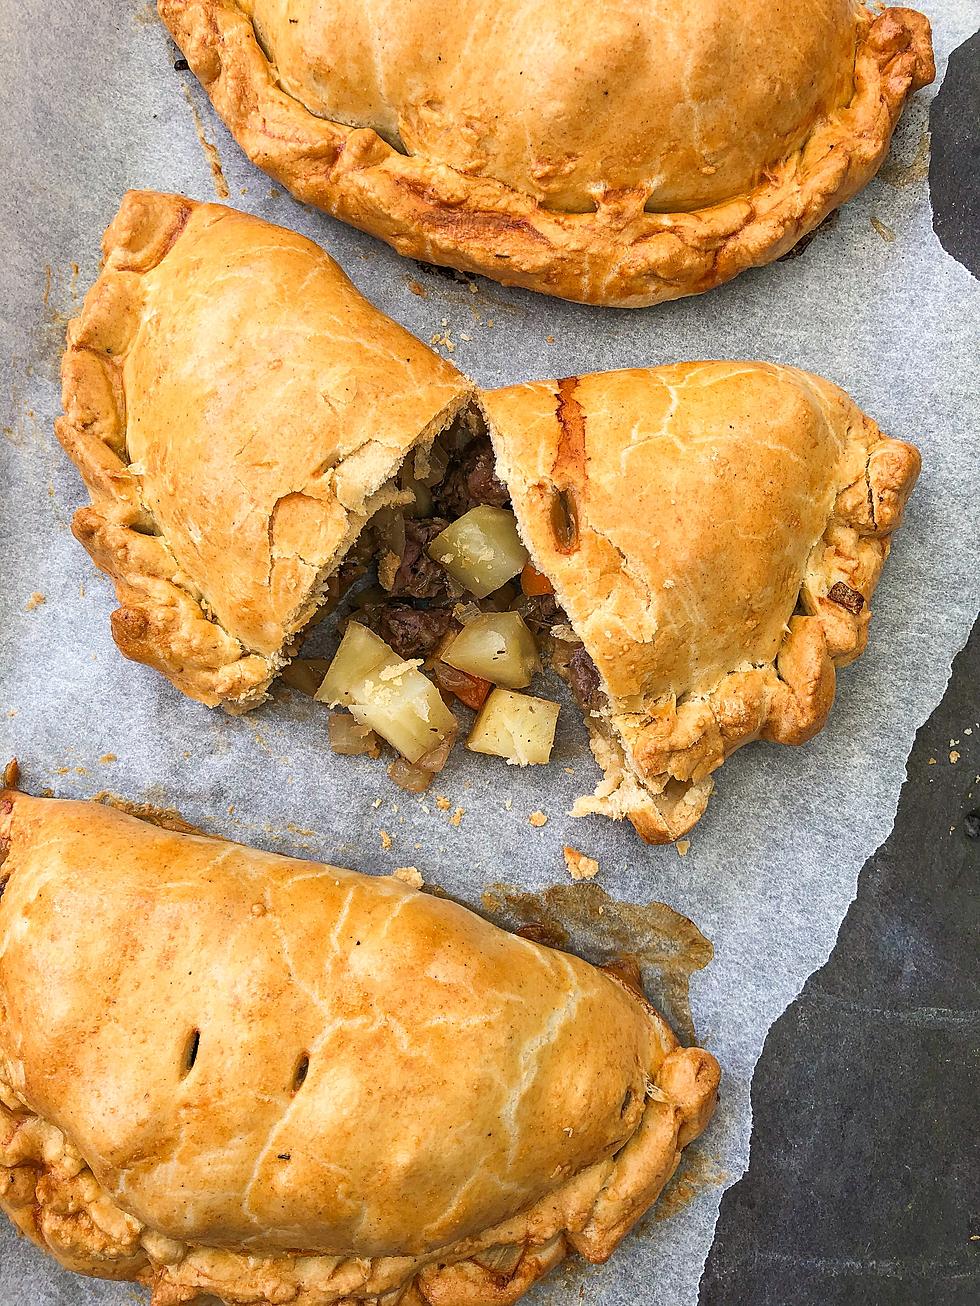 Here’s Where to Get Your Pasty Fix in Near Kalamazoo